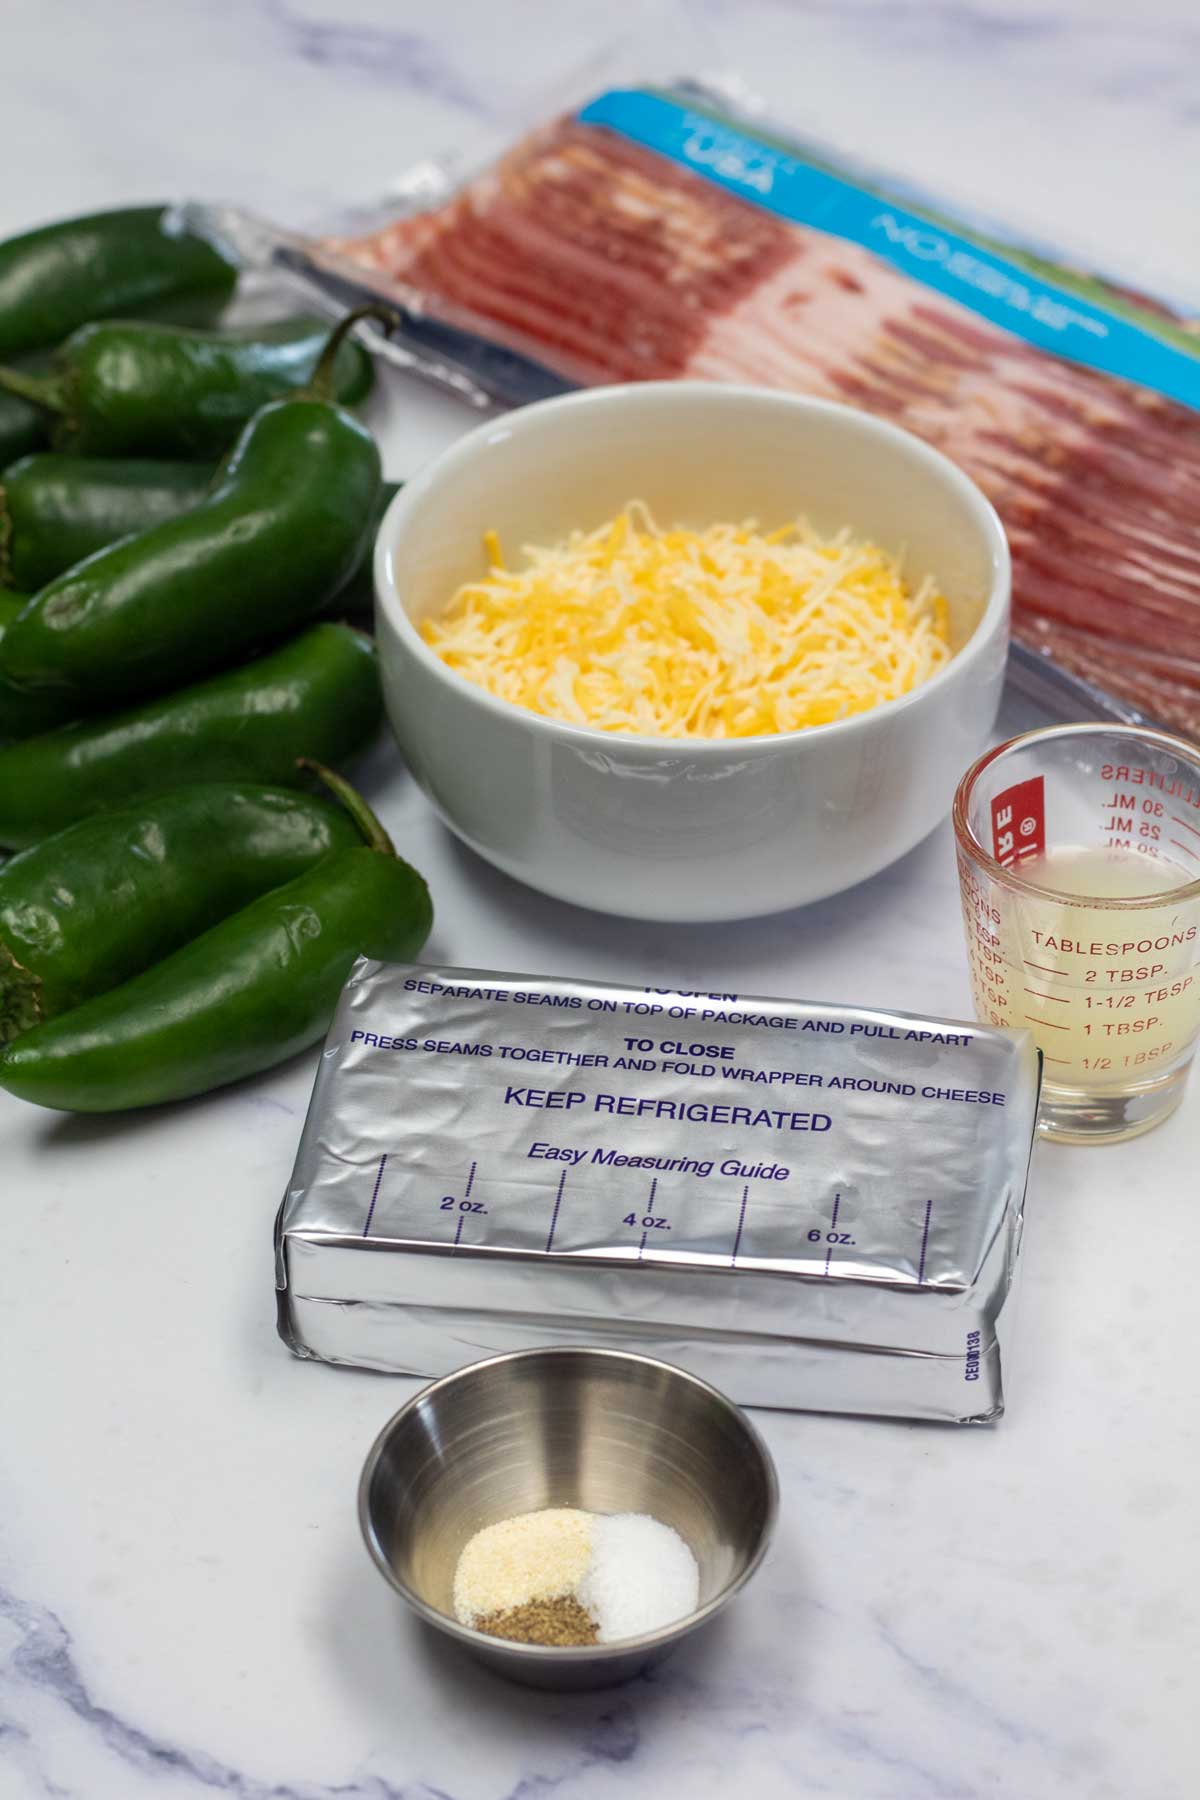 Tall image showing ingredients needed for bacon wrapped jalapeno poppers with cream cheese.